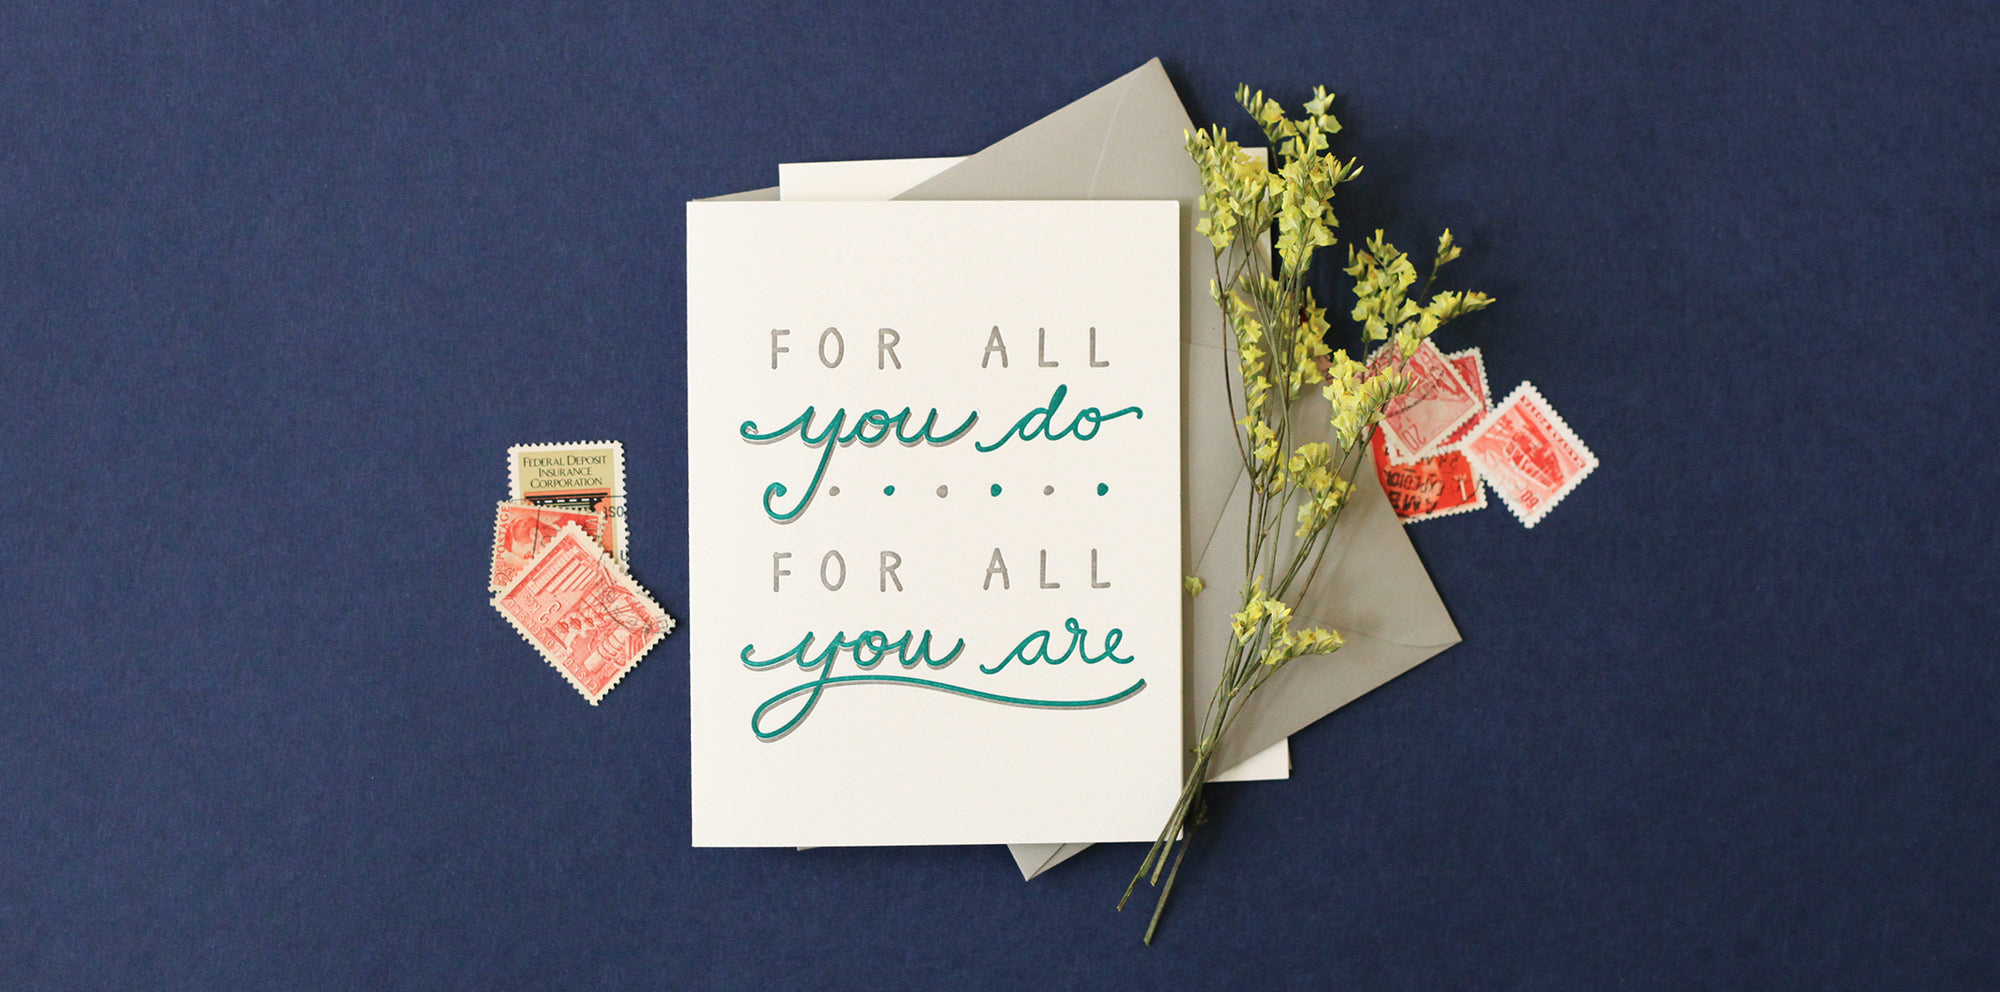 greeting card that says for all you do for all you are surrounded by flowers and postage stamps